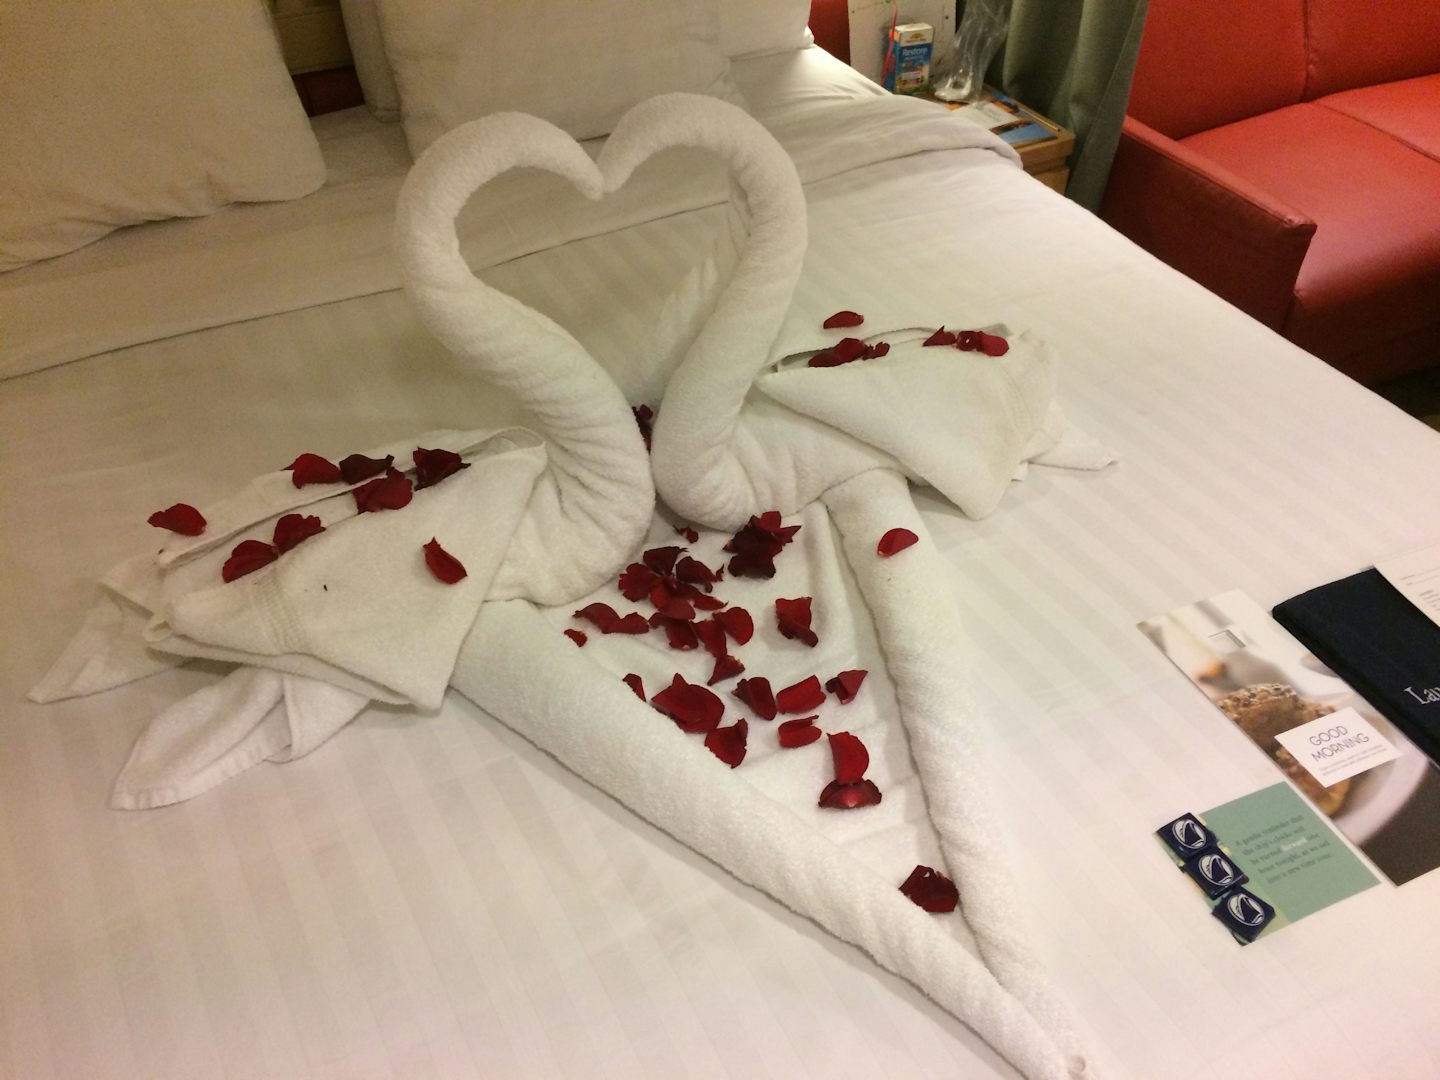 Towel Swan Surprise in our room after Renewal of Vows ceremony